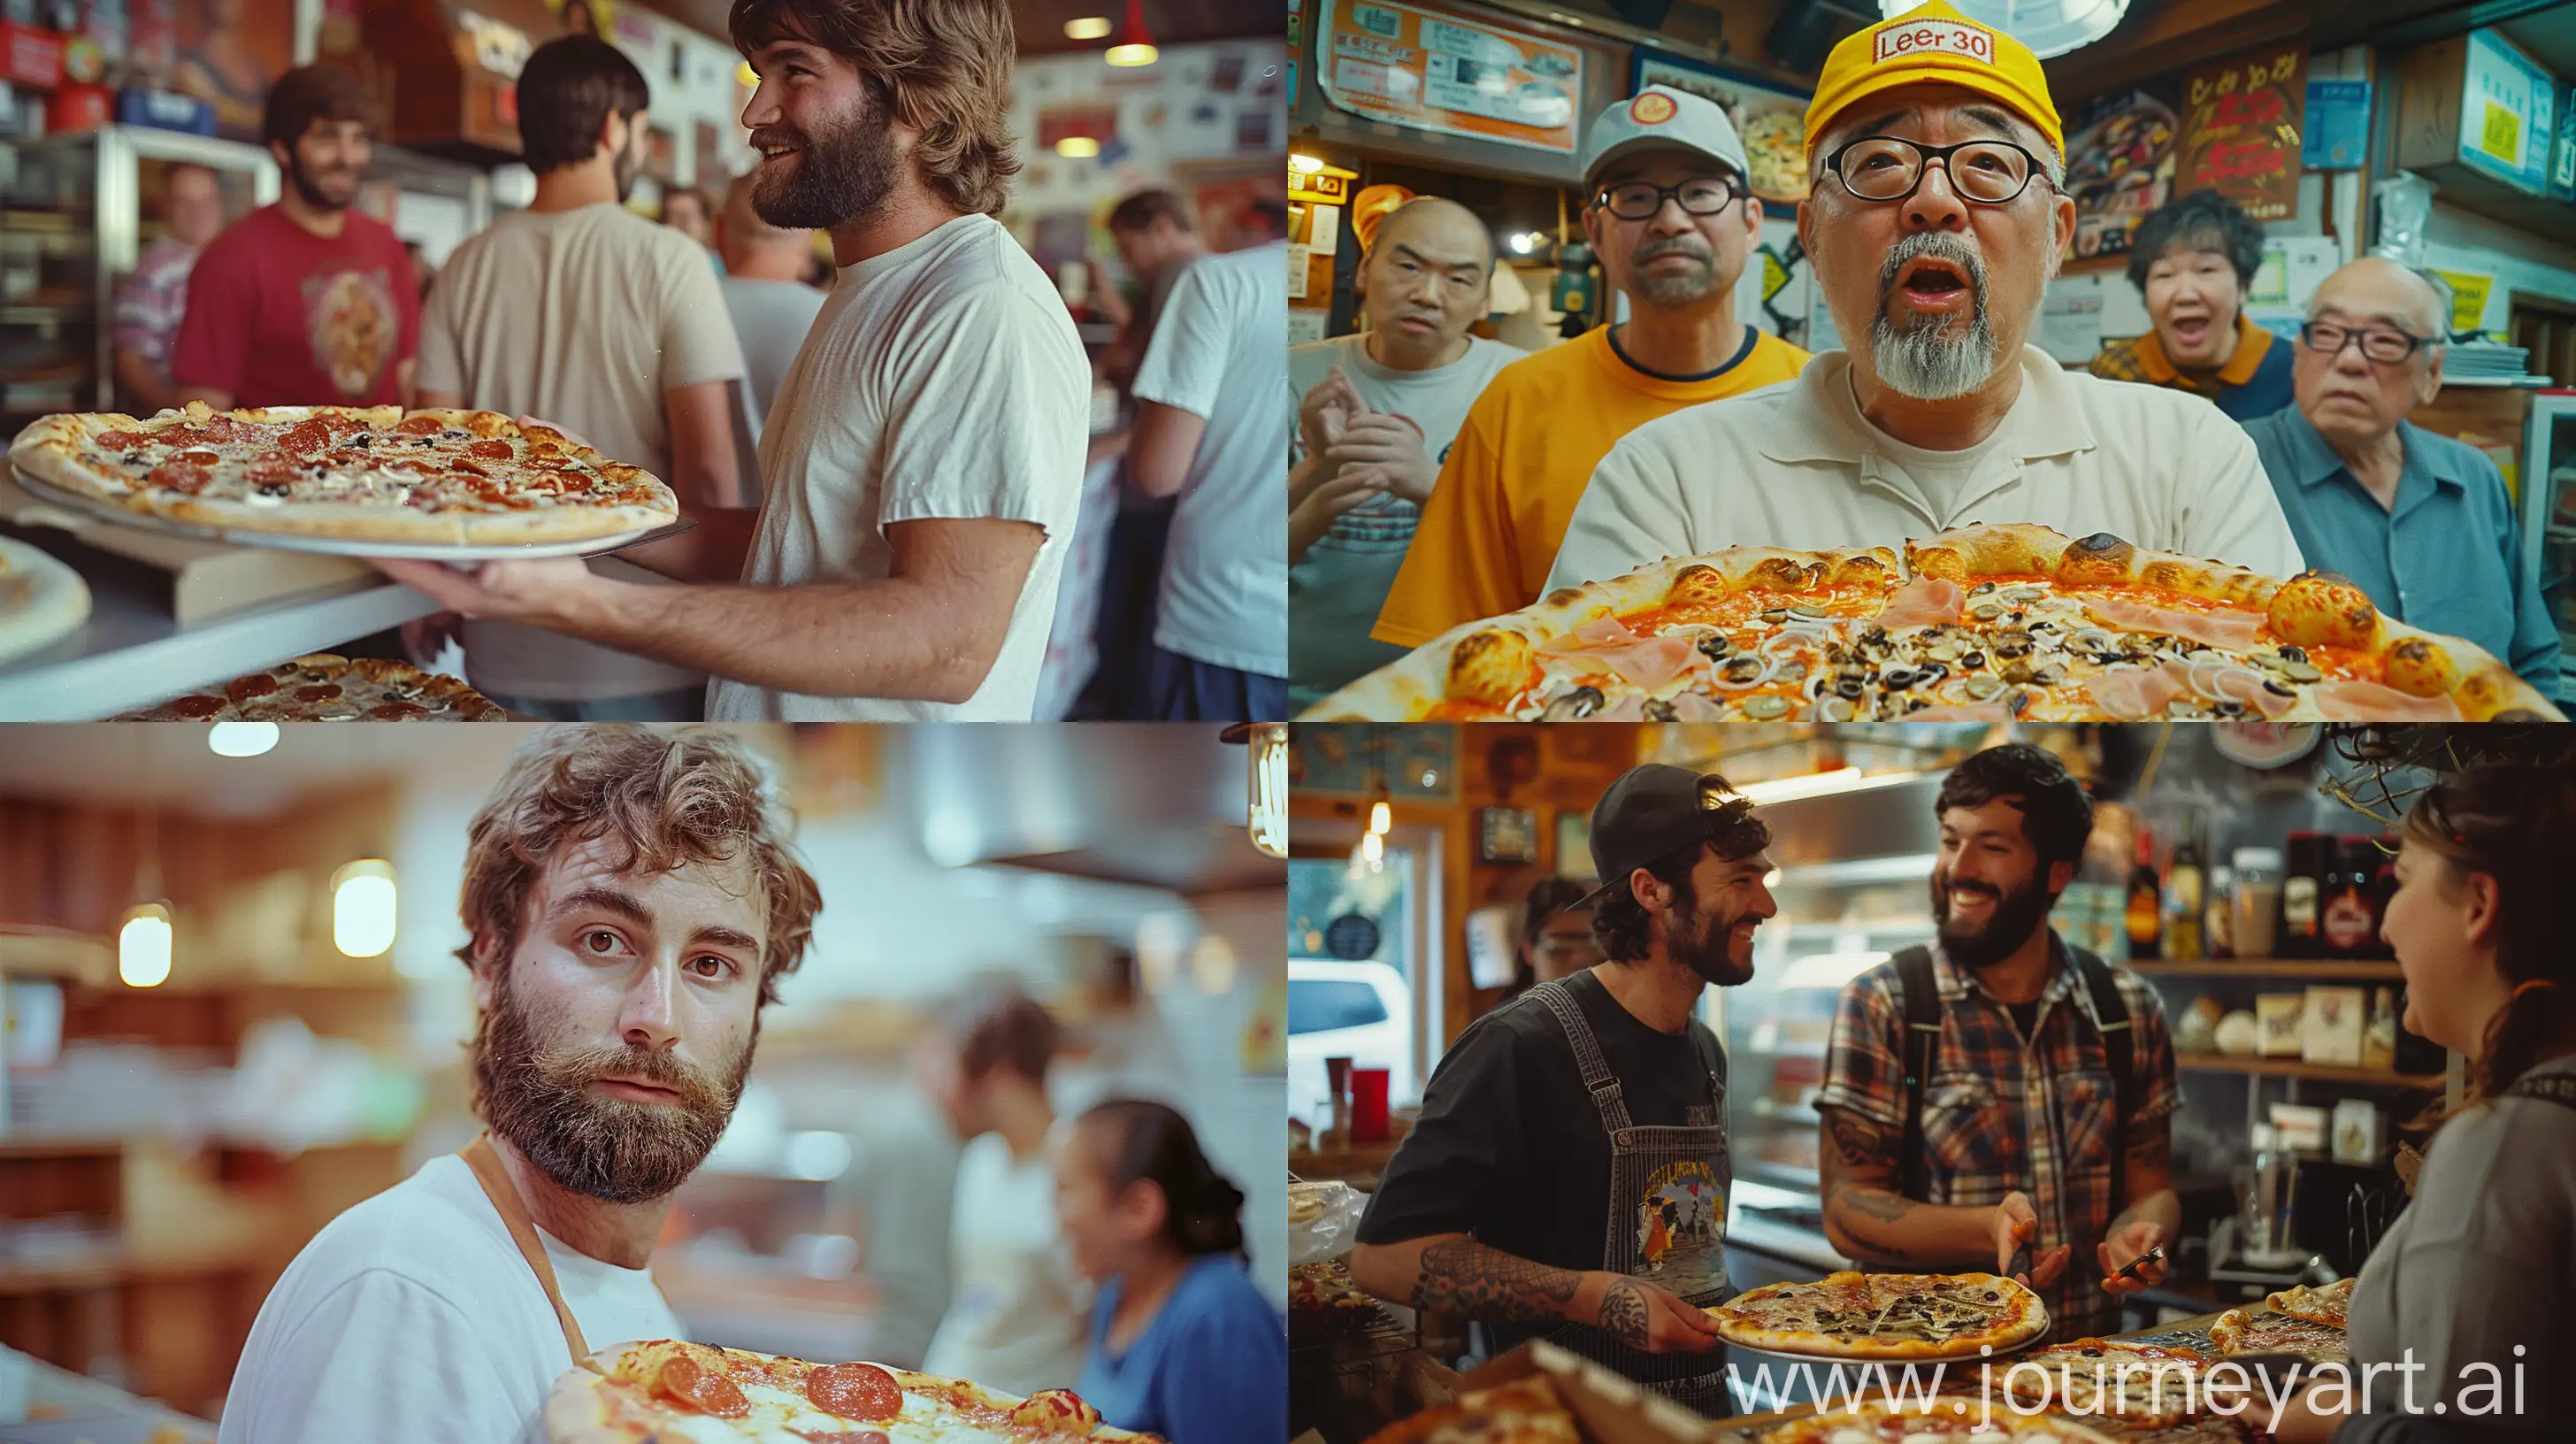 Hilarious-Reactions-to-Unusual-Pizza-Toppings-at-a-Quirky-Pizza-Shop